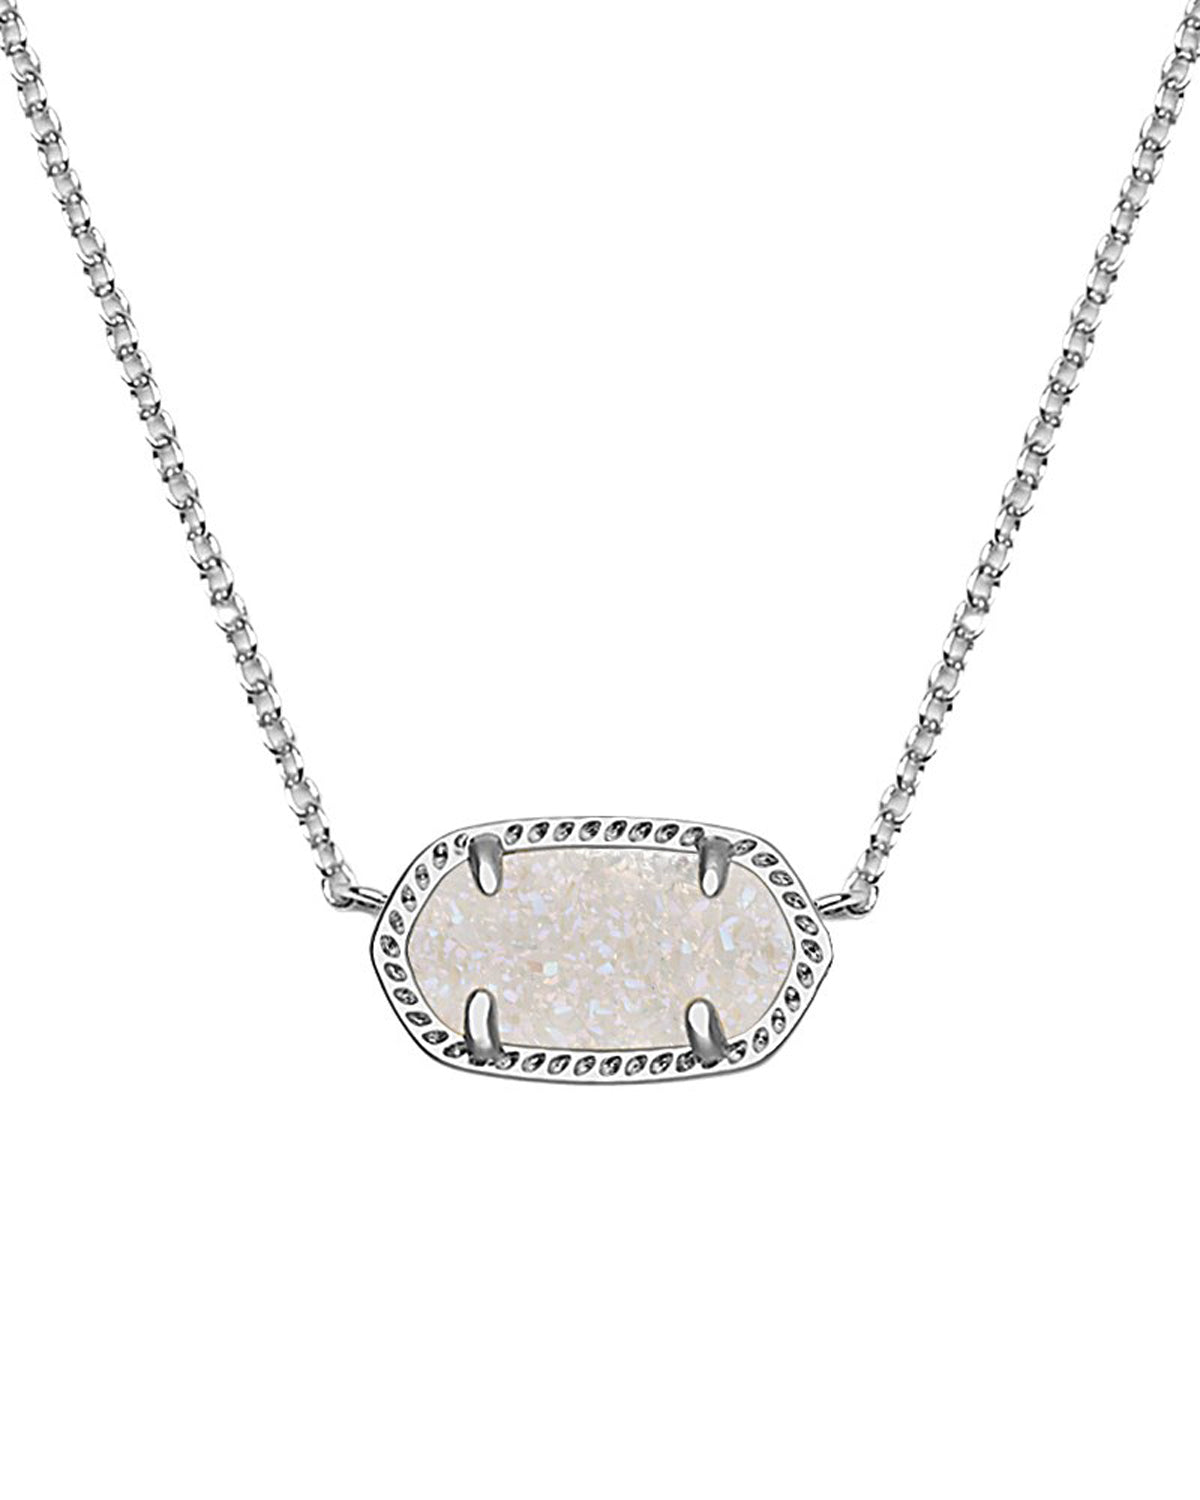 Kendra Scott Elisa Oval Pendant Necklace in Iridescent Drusy and Rhodium